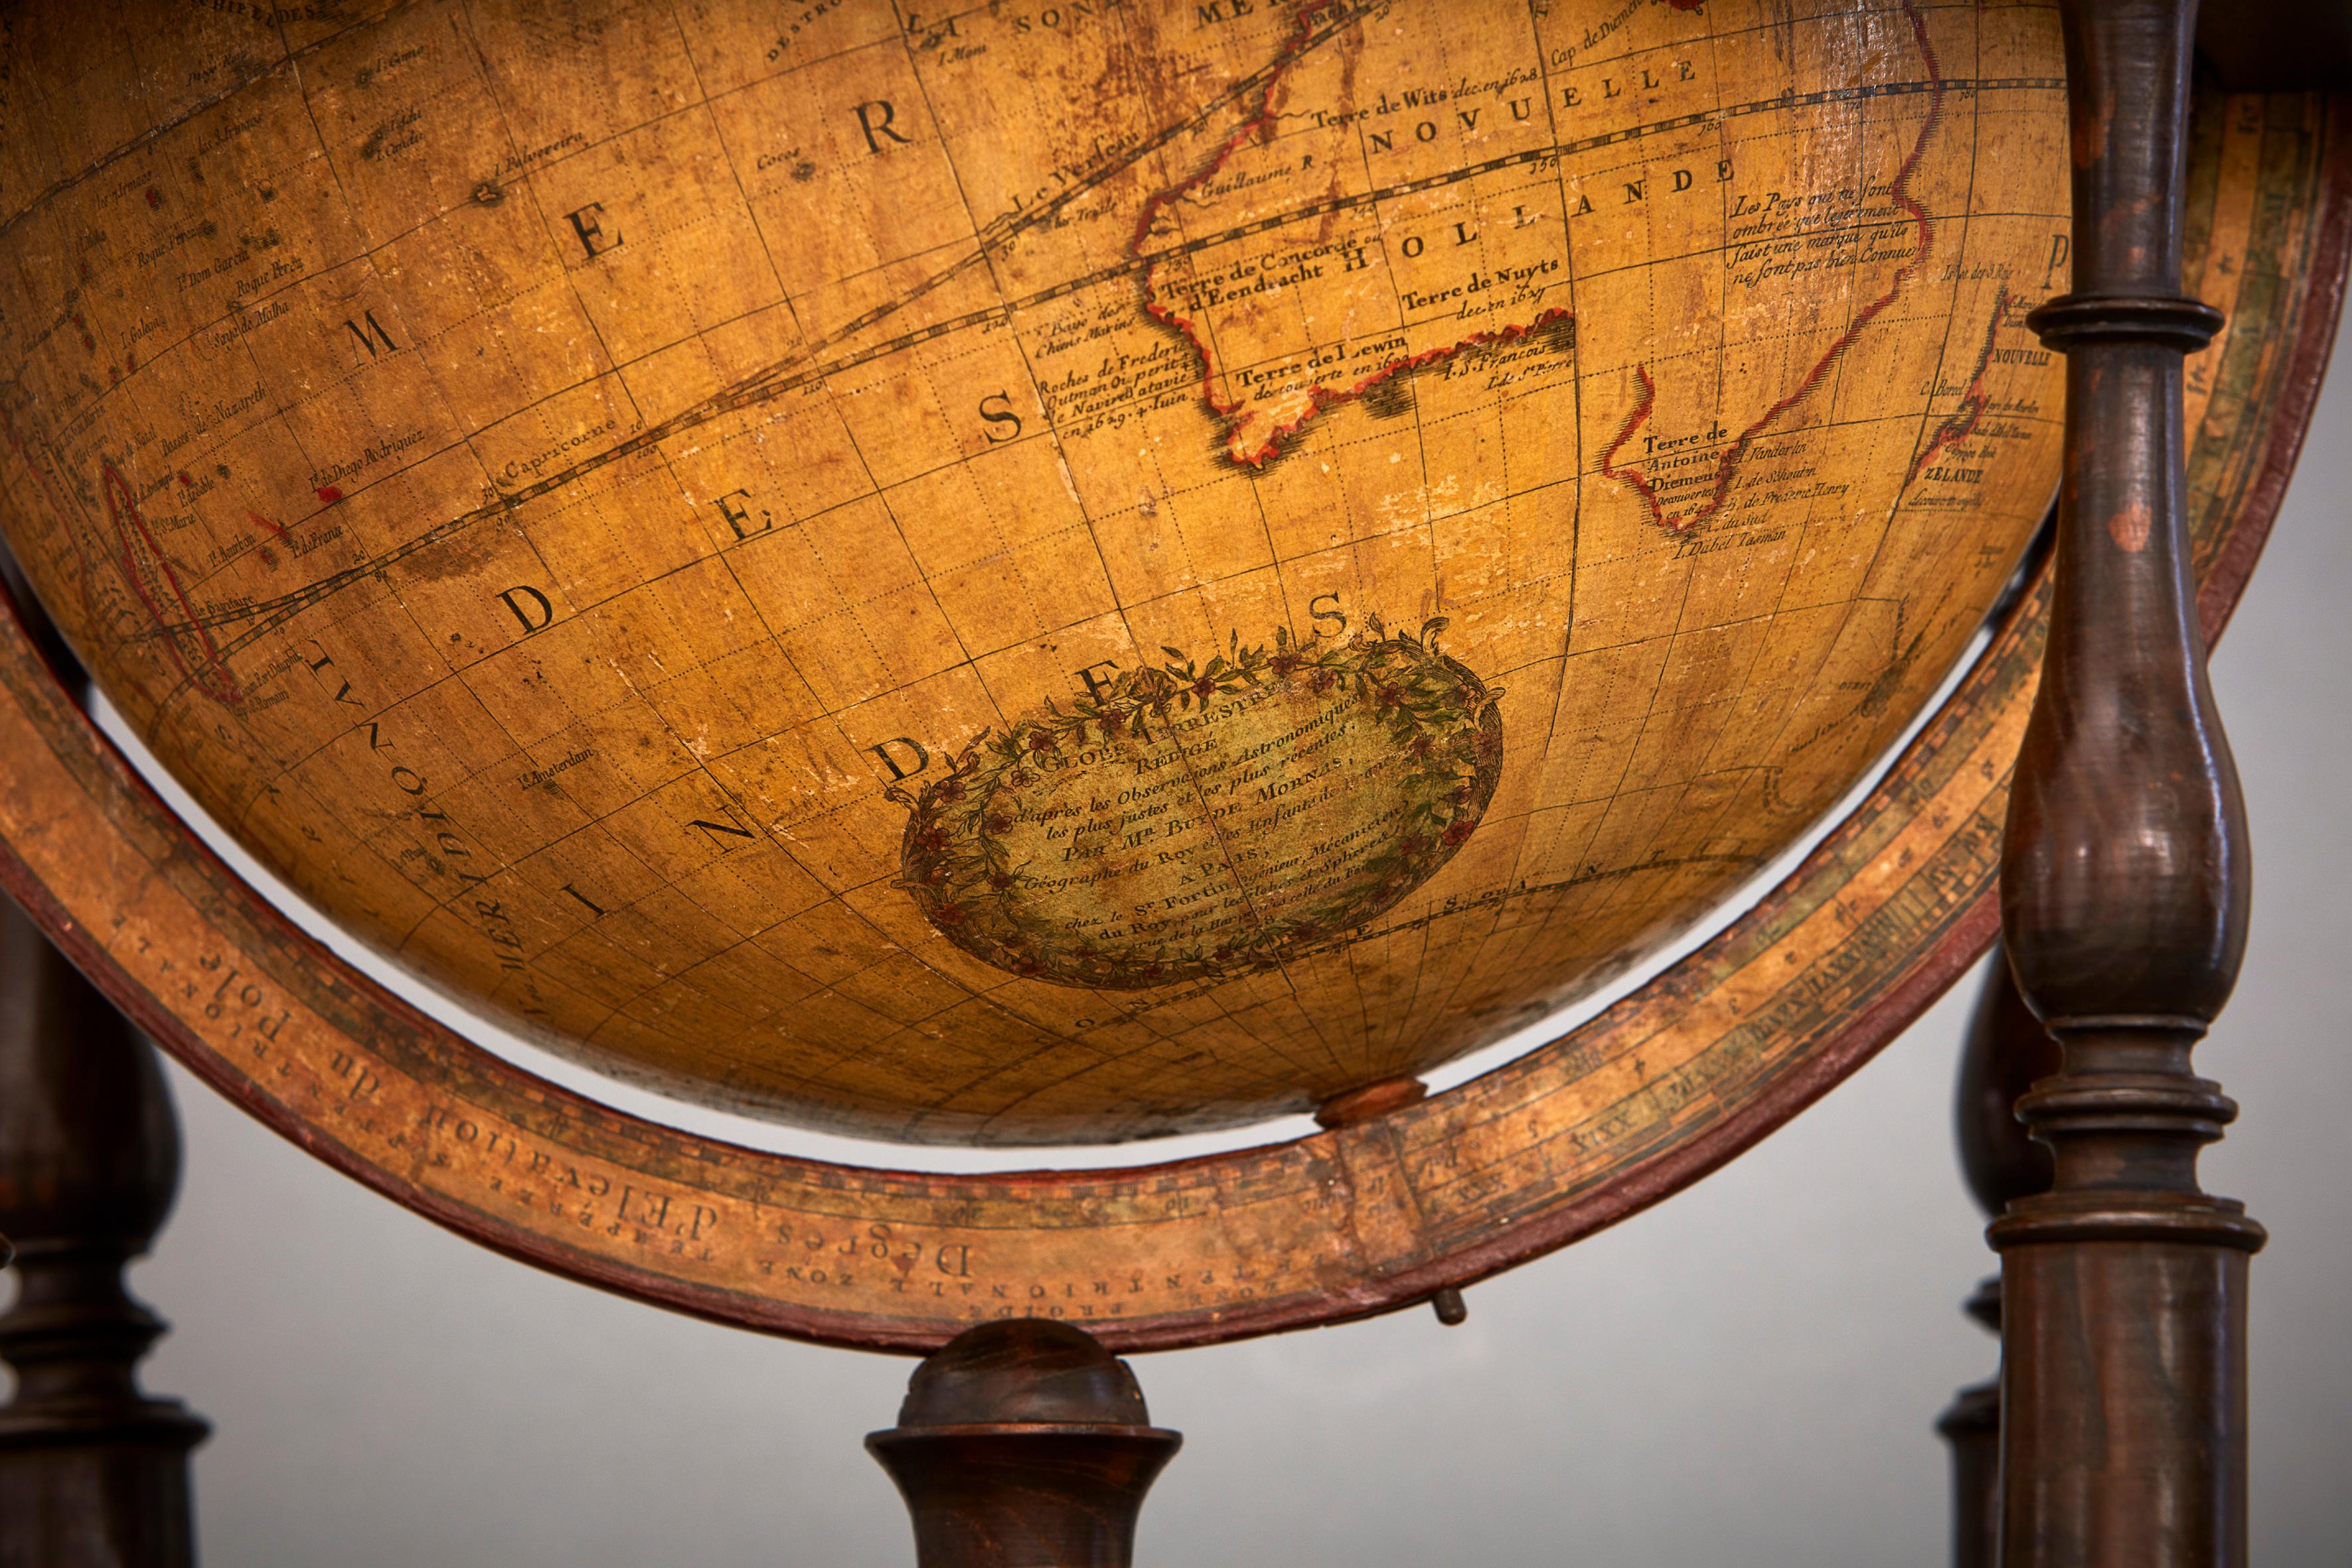 A very rare and unusually large Louis XVI terrestrial globe by the royal French globemaker Jean-Baptiste Fortin (1740-1817). He had a shop in Paris, in the Rue de la Harpe and made globes of various sizes and published geographical works. 
This